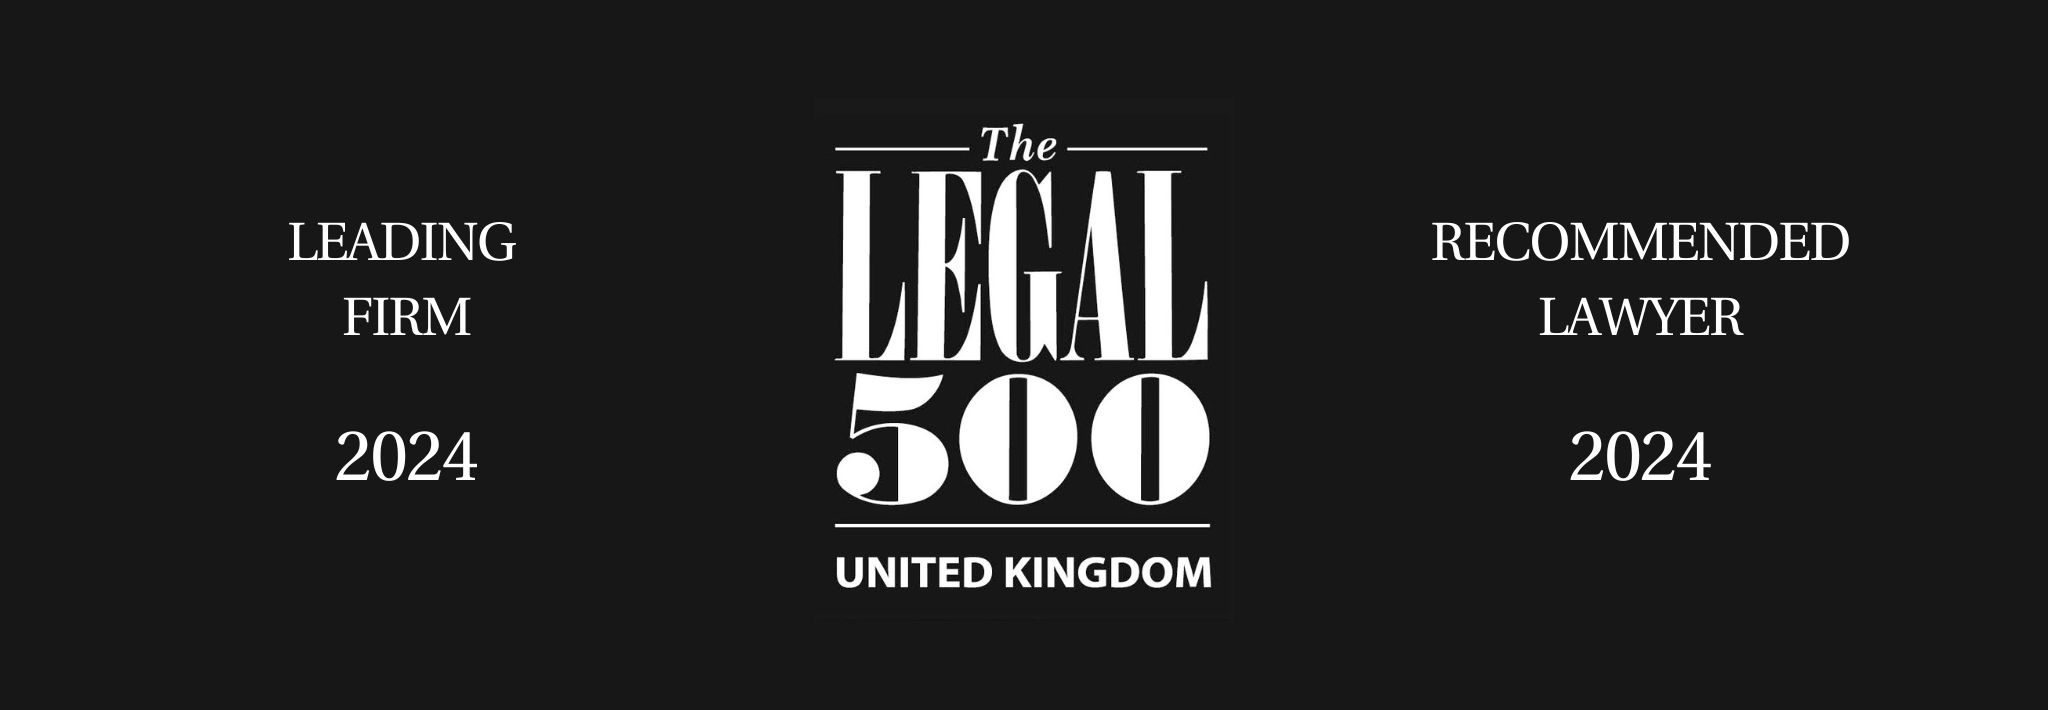 Legal500 legal directory ranking 2024 - GBH Law